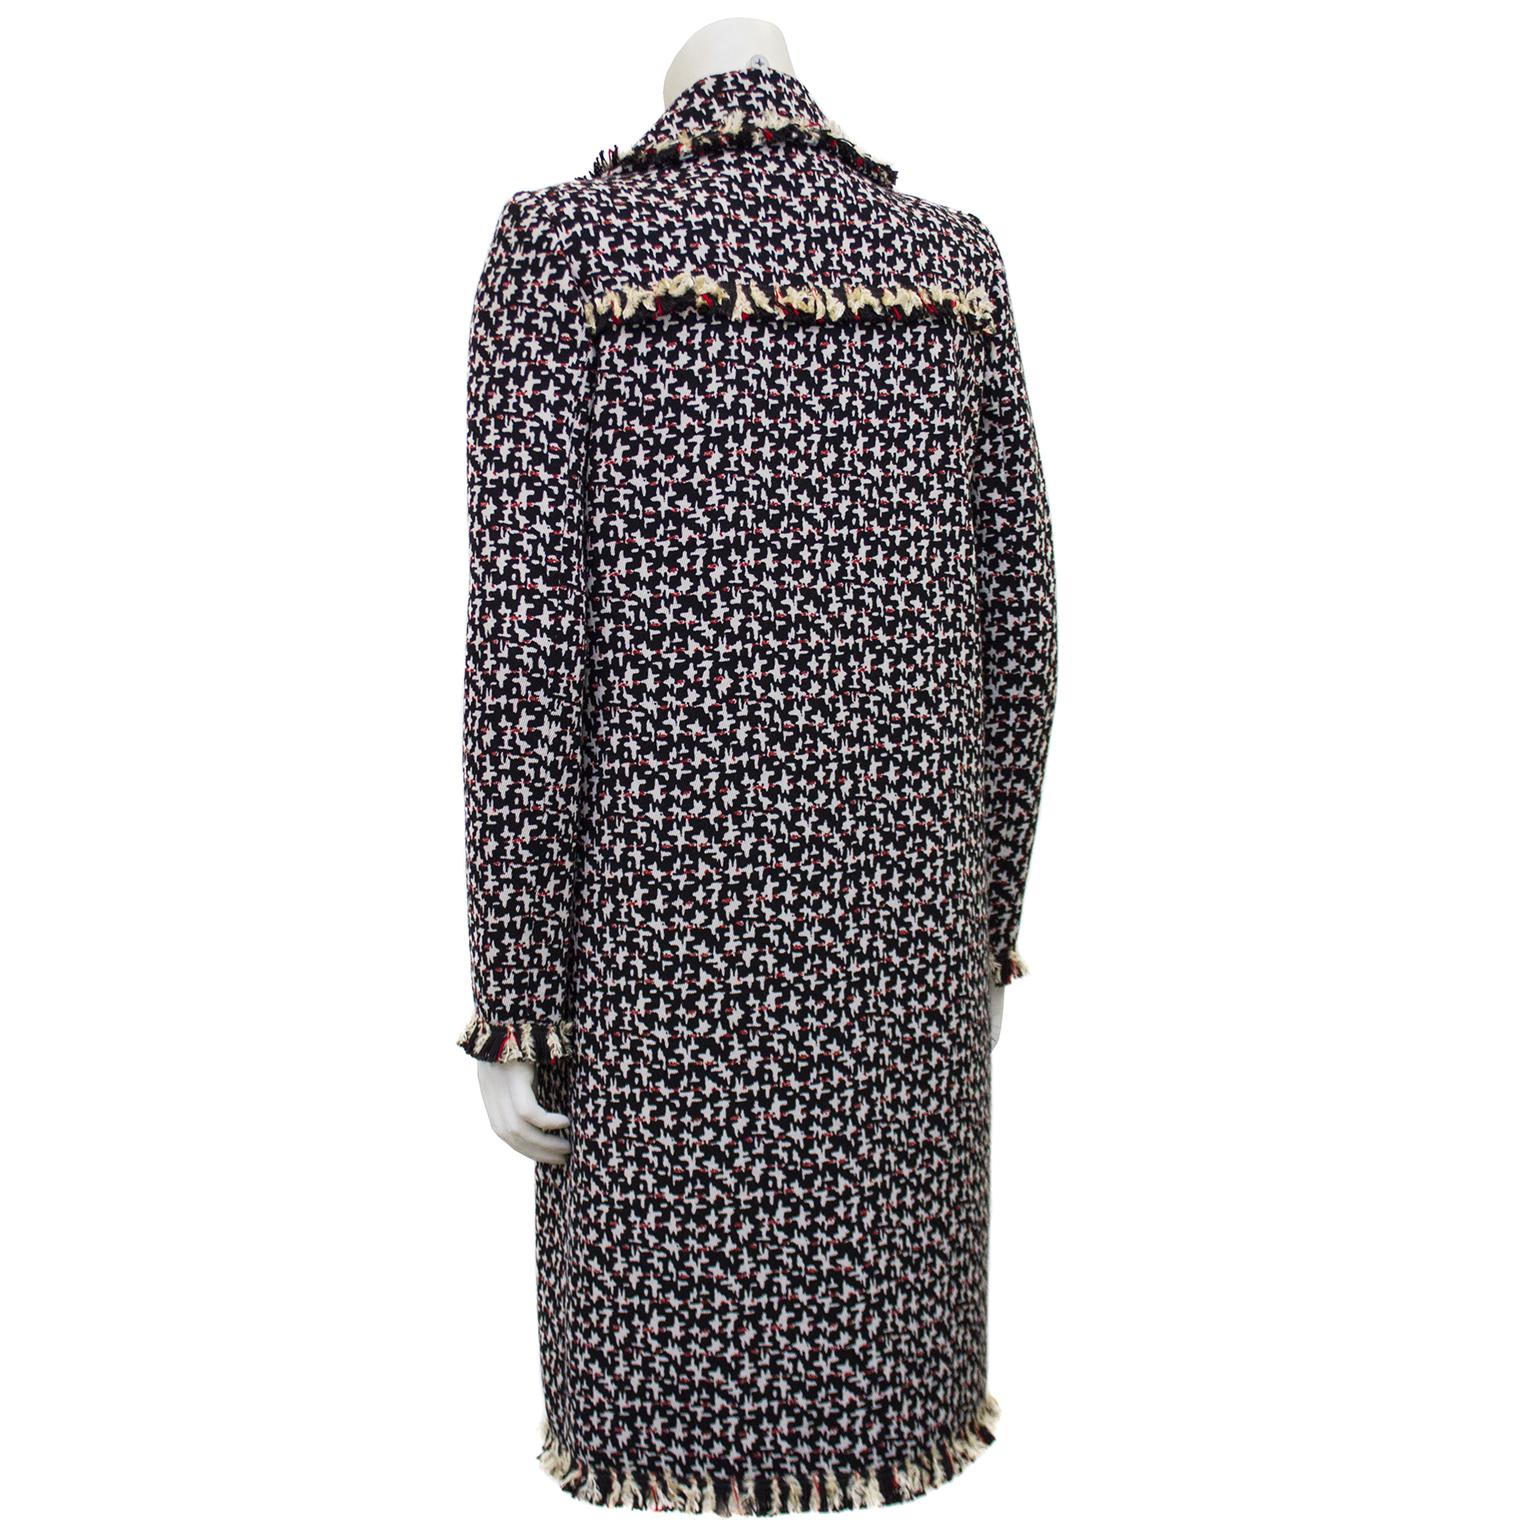 Women's Mid 2000s Oscar de la Renta Navy and Red Abstract Houndstooth Dress Ensemble